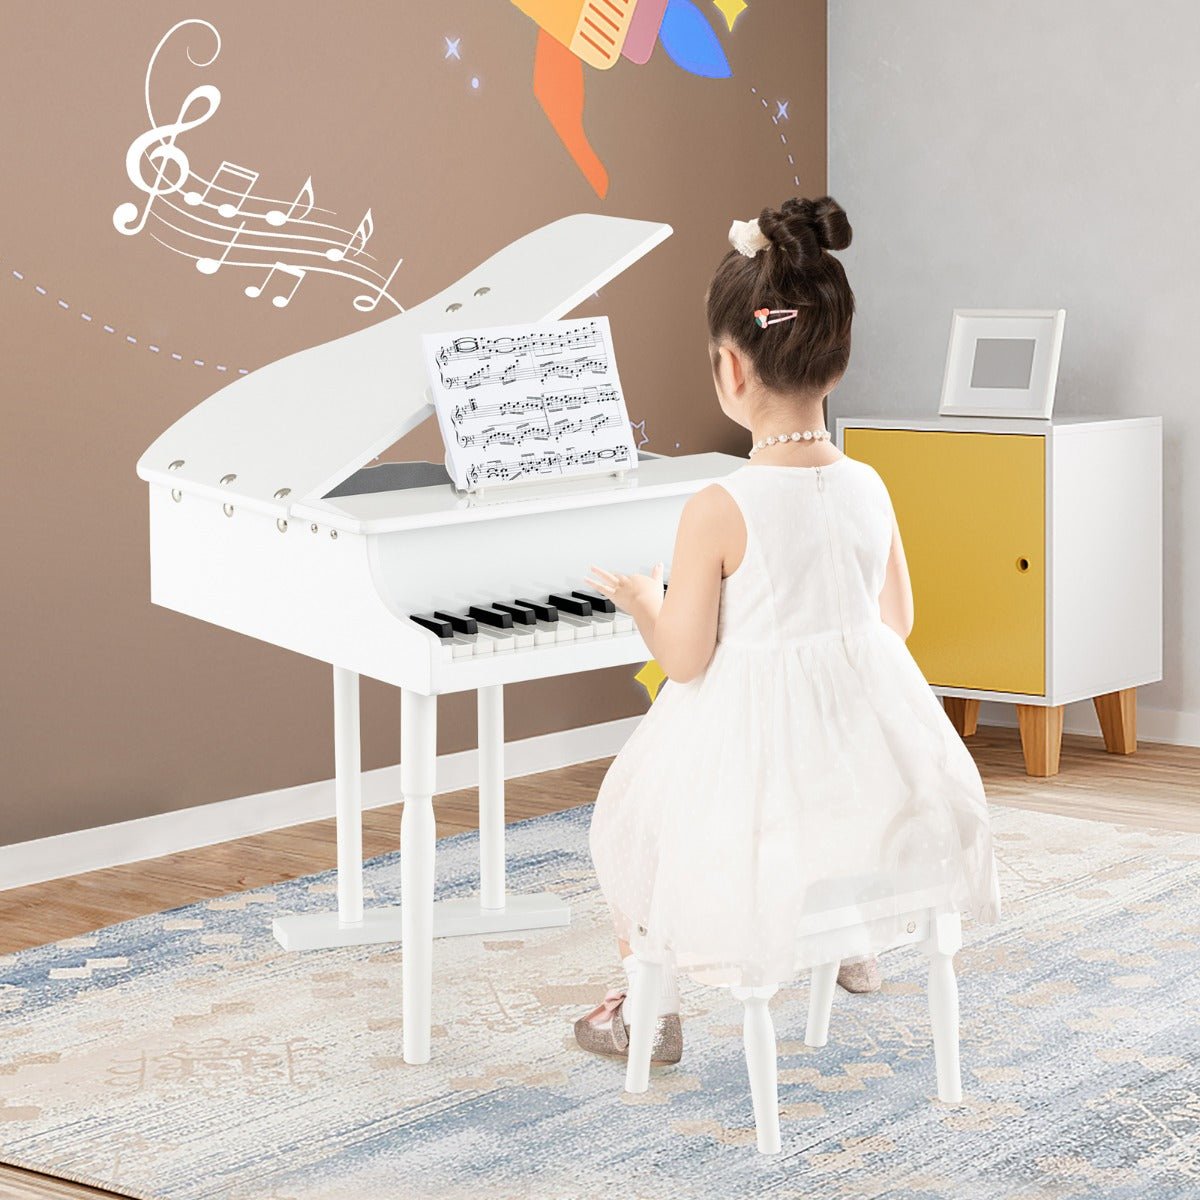 Buy the Kids Piano Keyboard with Sheet Music Stand